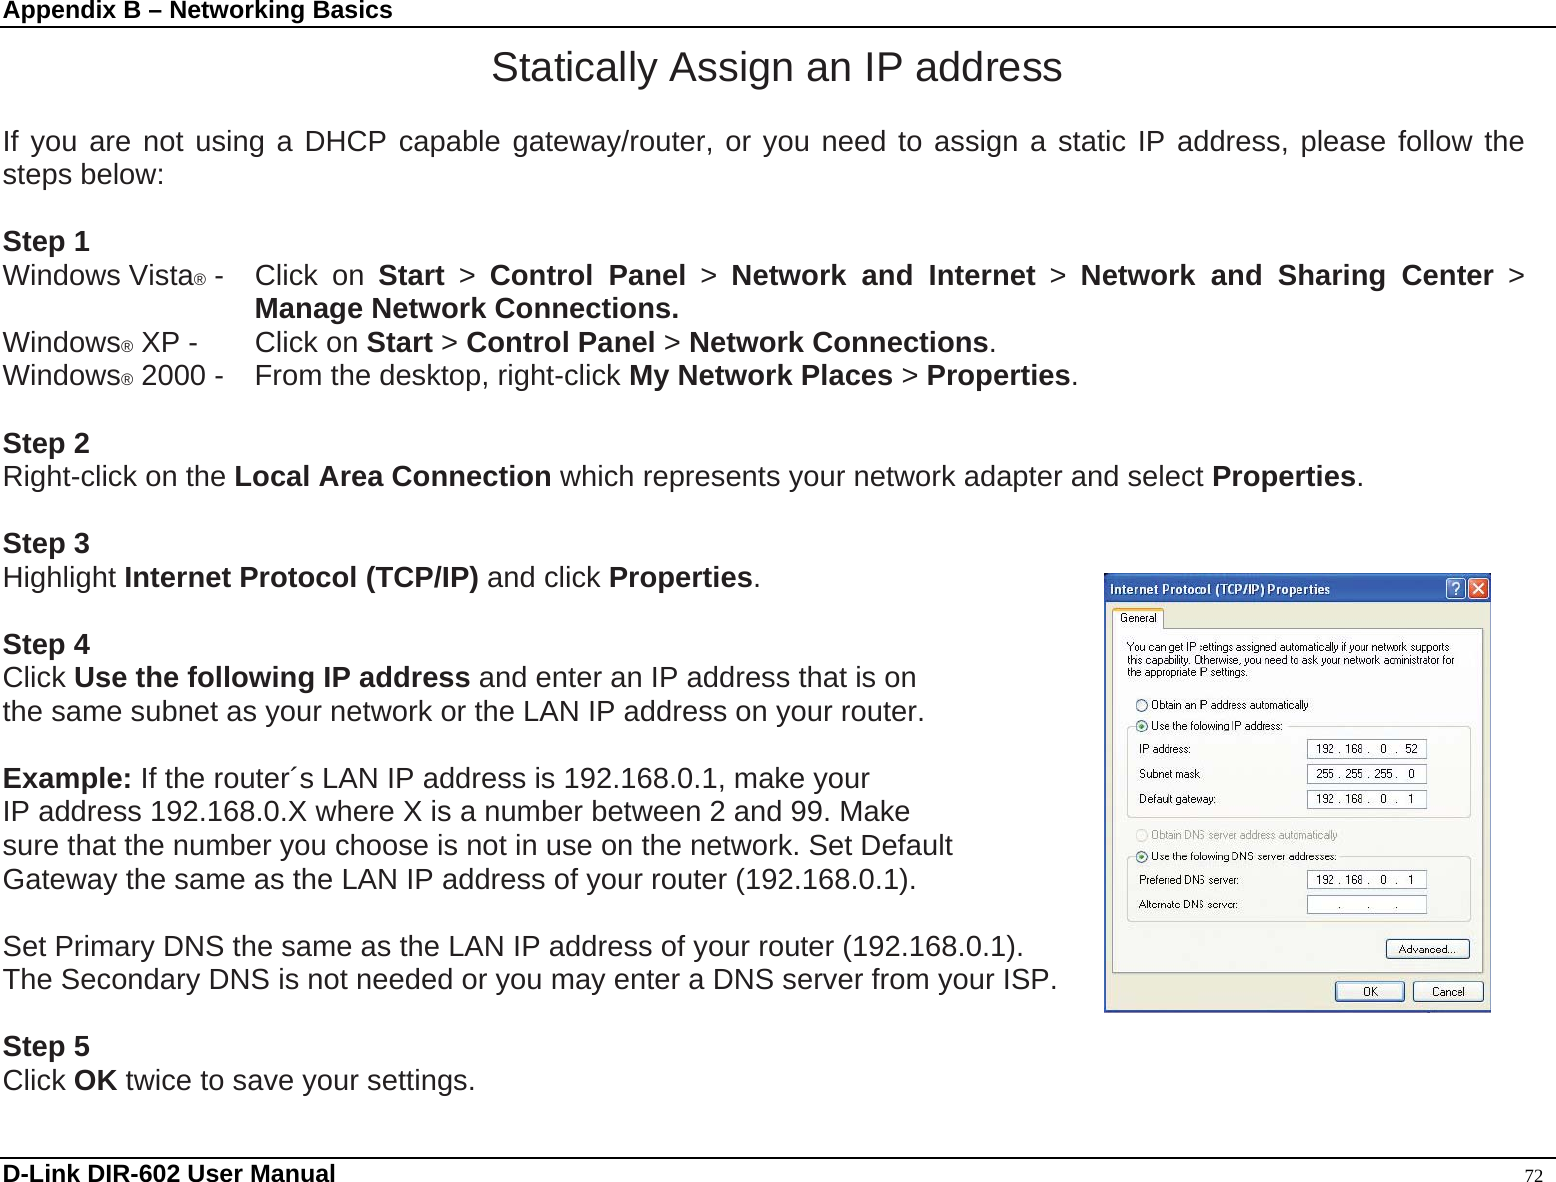 Appendix B – Networking Basics Statically Assign an IP address  If you are not using a DHCP capable gateway/router, or you need to assign a static IP address, please follow the steps below:  Step 1 Windows Vista® -  Click  on  Start &gt; Control Panel &gt; Network and Internet &gt; Network and Sharing Center &gt; Manage Network Connections. Windows® XP -  Click on Start &gt; Control Panel &gt; Network Connections. Windows® 2000 -  From the desktop, right-click My Network Places &gt; Properties.  Step 2 Right-click on the Local Area Connection which represents your network adapter and select Properties.  Step 3 Highlight Internet Protocol (TCP/IP) and click Properties.  Step 4 Click Use the following IP address and enter an IP address that is on   the same subnet as your network or the LAN IP address on your router.    Example: If the router´s LAN IP address is 192.168.0.1, make your   IP address 192.168.0.X where X is a number between 2 and 99. Make sure that the number you choose is not in use on the network. Set Default Gateway the same as the LAN IP address of your router (192.168.0.1).    Set Primary DNS the same as the LAN IP address of your router (192.168.0.1).   The Secondary DNS is not needed or you may enter a DNS server from your ISP.  Step 5 Click OK twice to save your settings. D-Link DIR-602 User Manual                                                                                               72 